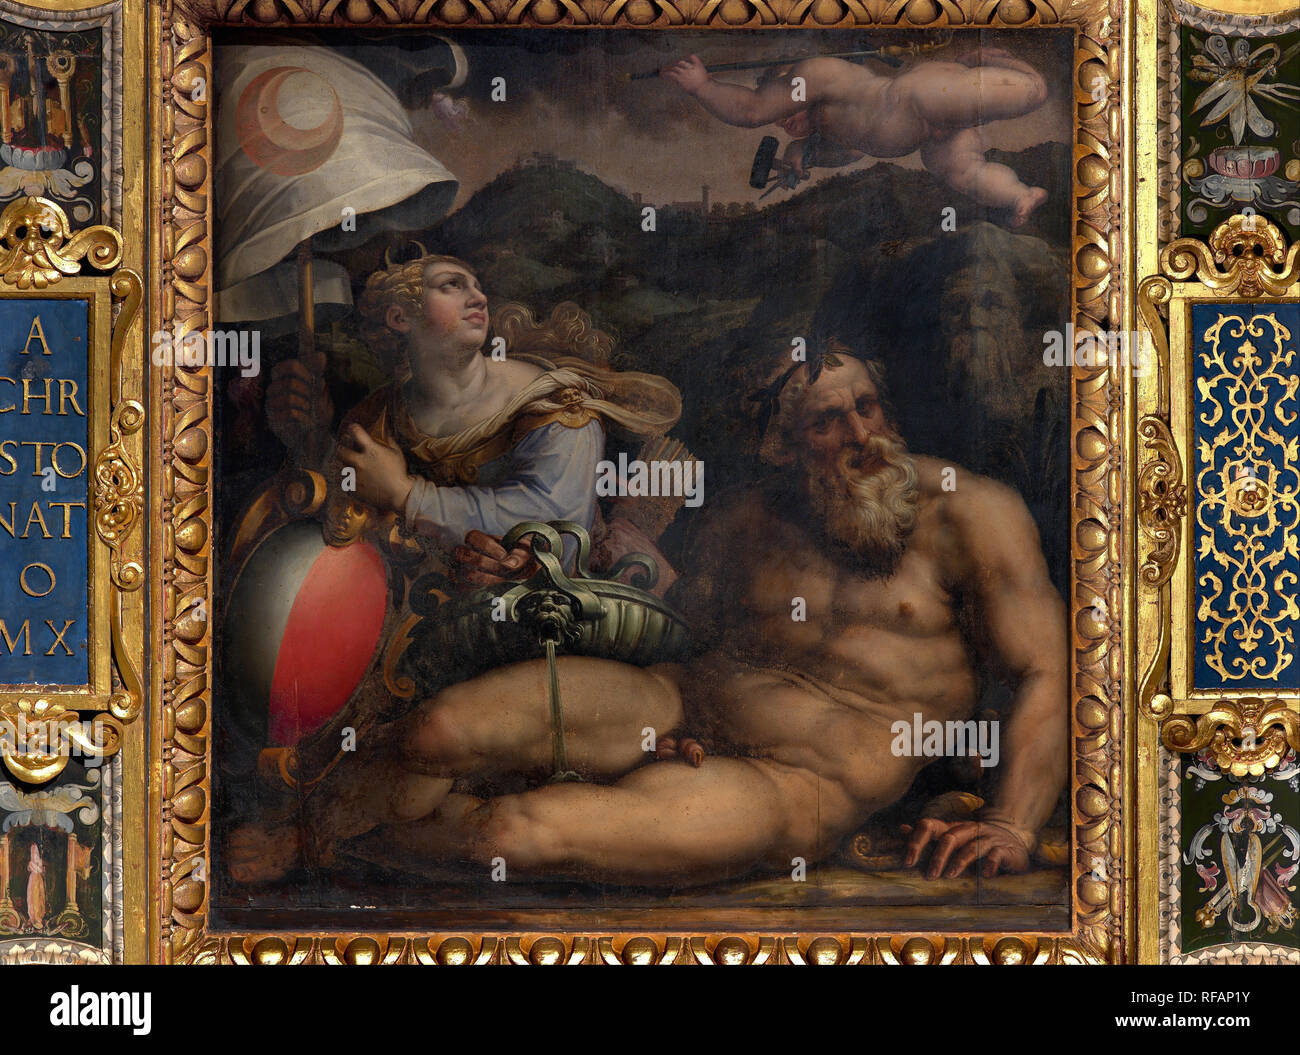 Allegory of Fiesole. Date/Period: 1563 - 1565. Oil painting on wood. Height: 250 mm (9.84 in); Width: 250 mm (9.84 in). Author: Giorgio Vasari. VASARI, GIORGIO. Stock Photo